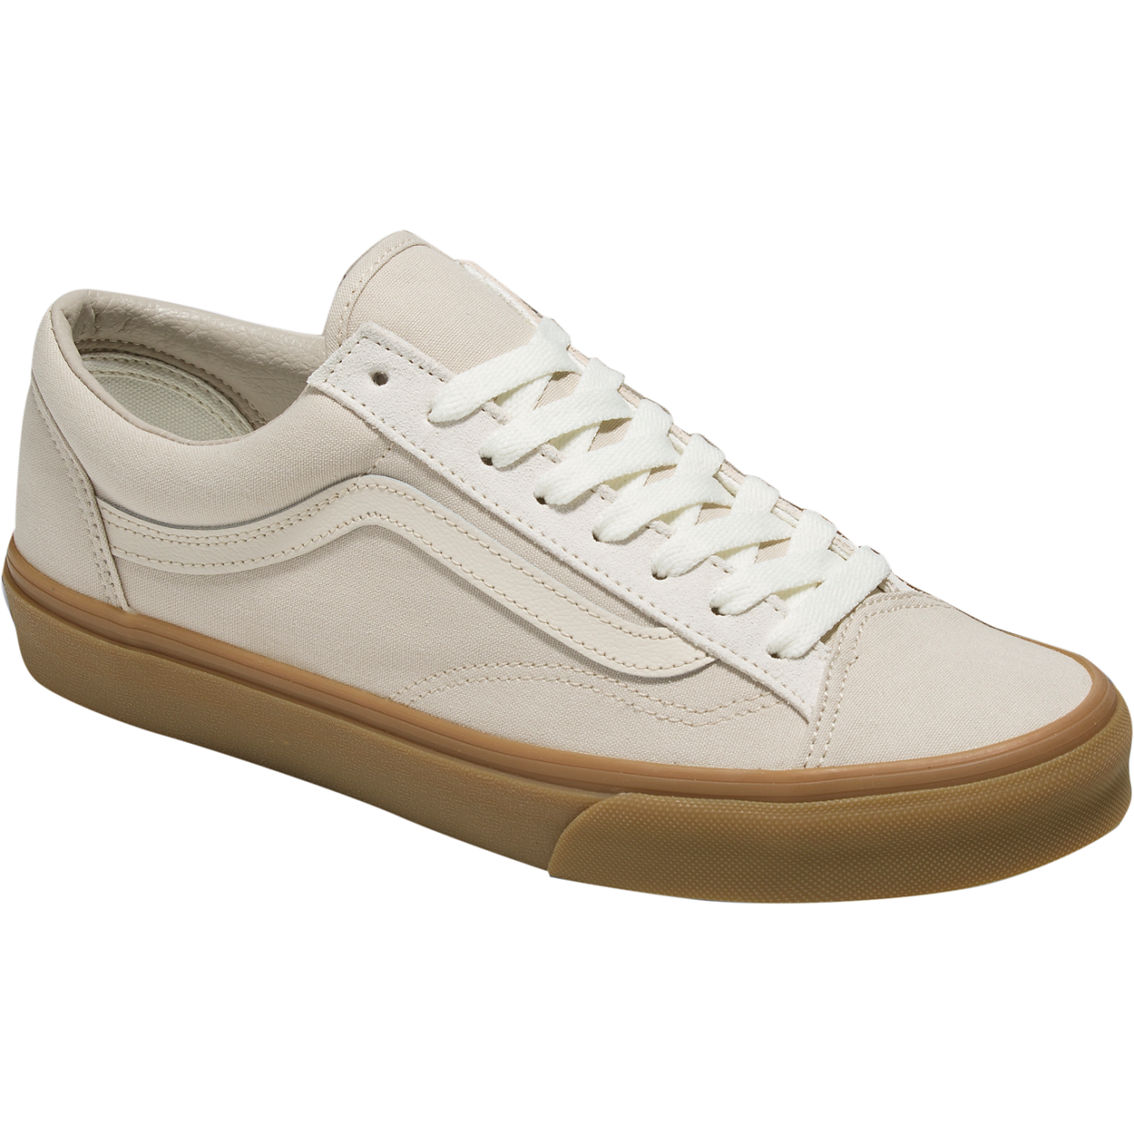 Vans Style 36 Shoes - Image 1 of 4